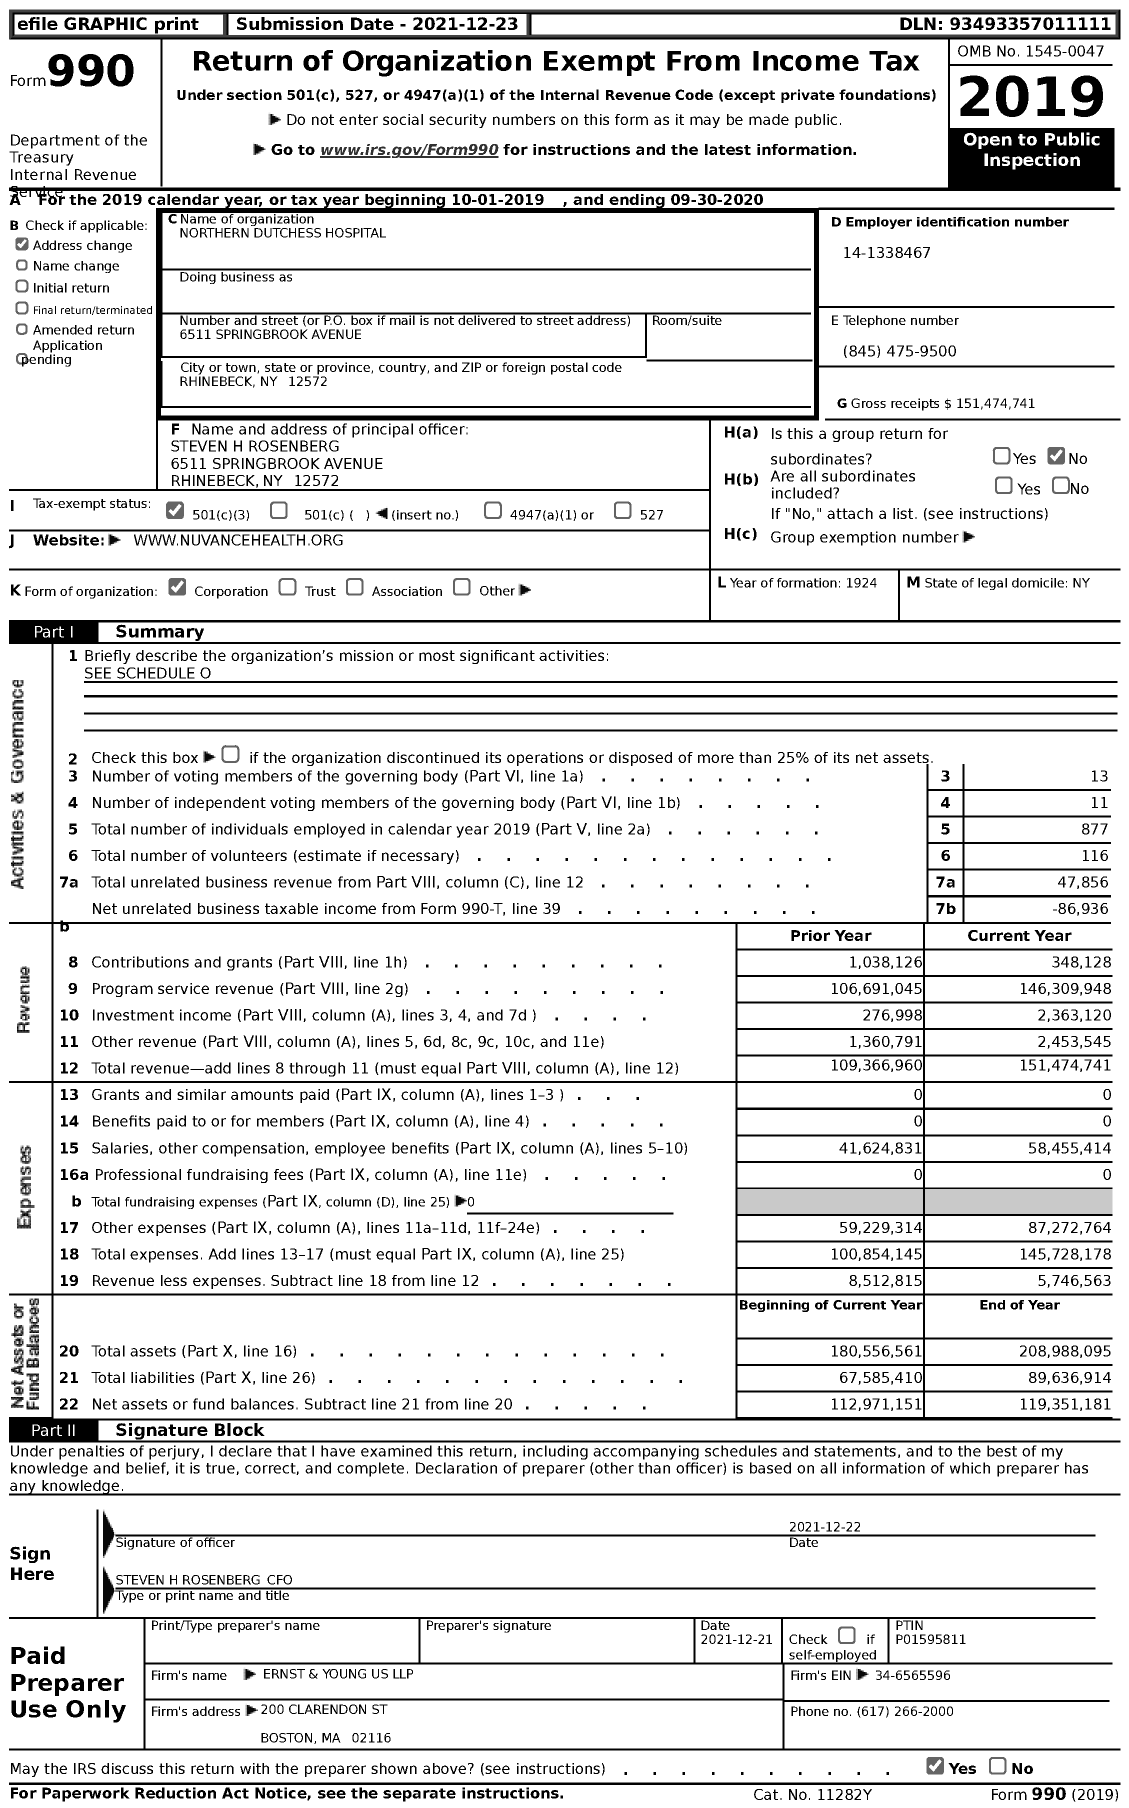 Image of first page of 2019 Form 990 for Northern Dutchess Hospital (NDH)